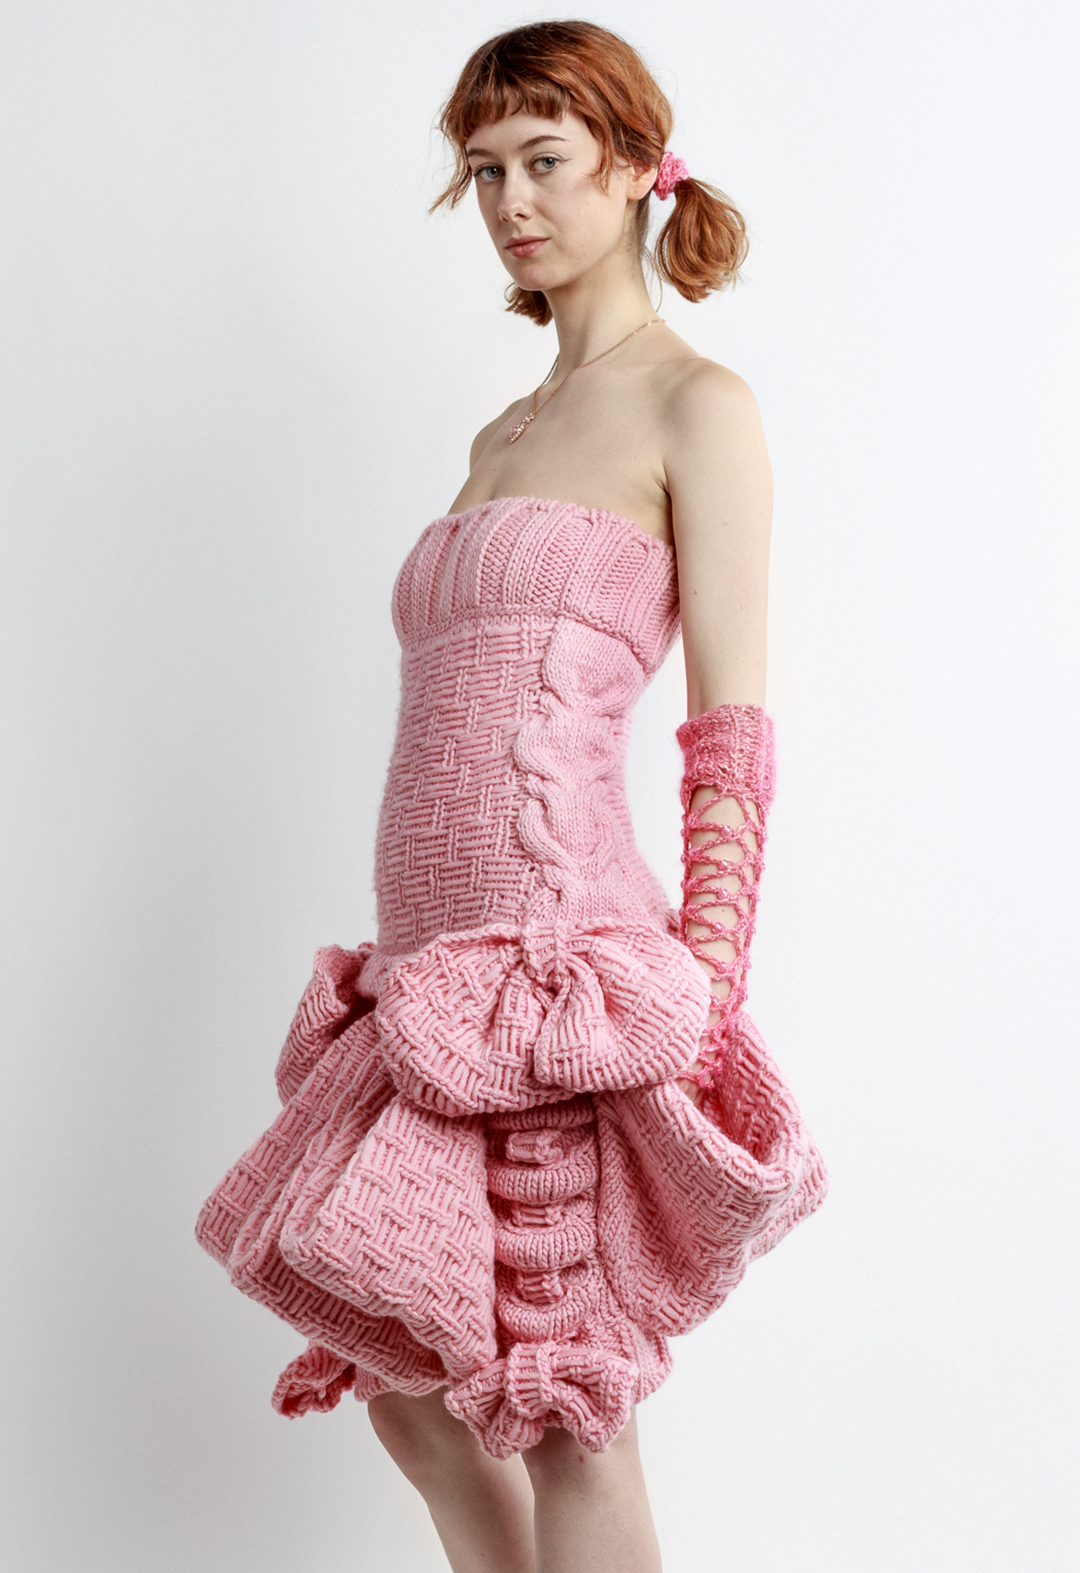 Photo of a girl posing in a pink sleeveless magical girl mini dress, looking to the camera. The dress is hand knit with baby pink pink wool. The dress features big bows and big pockets circling the skirt of the dress. The dress, and girl, are posed at a three-quarter view to the camera. The girl is wearing crochet fishnet gloves, pigtails, and a heart necklace. The girl has her hand placed in one of the big pockets.